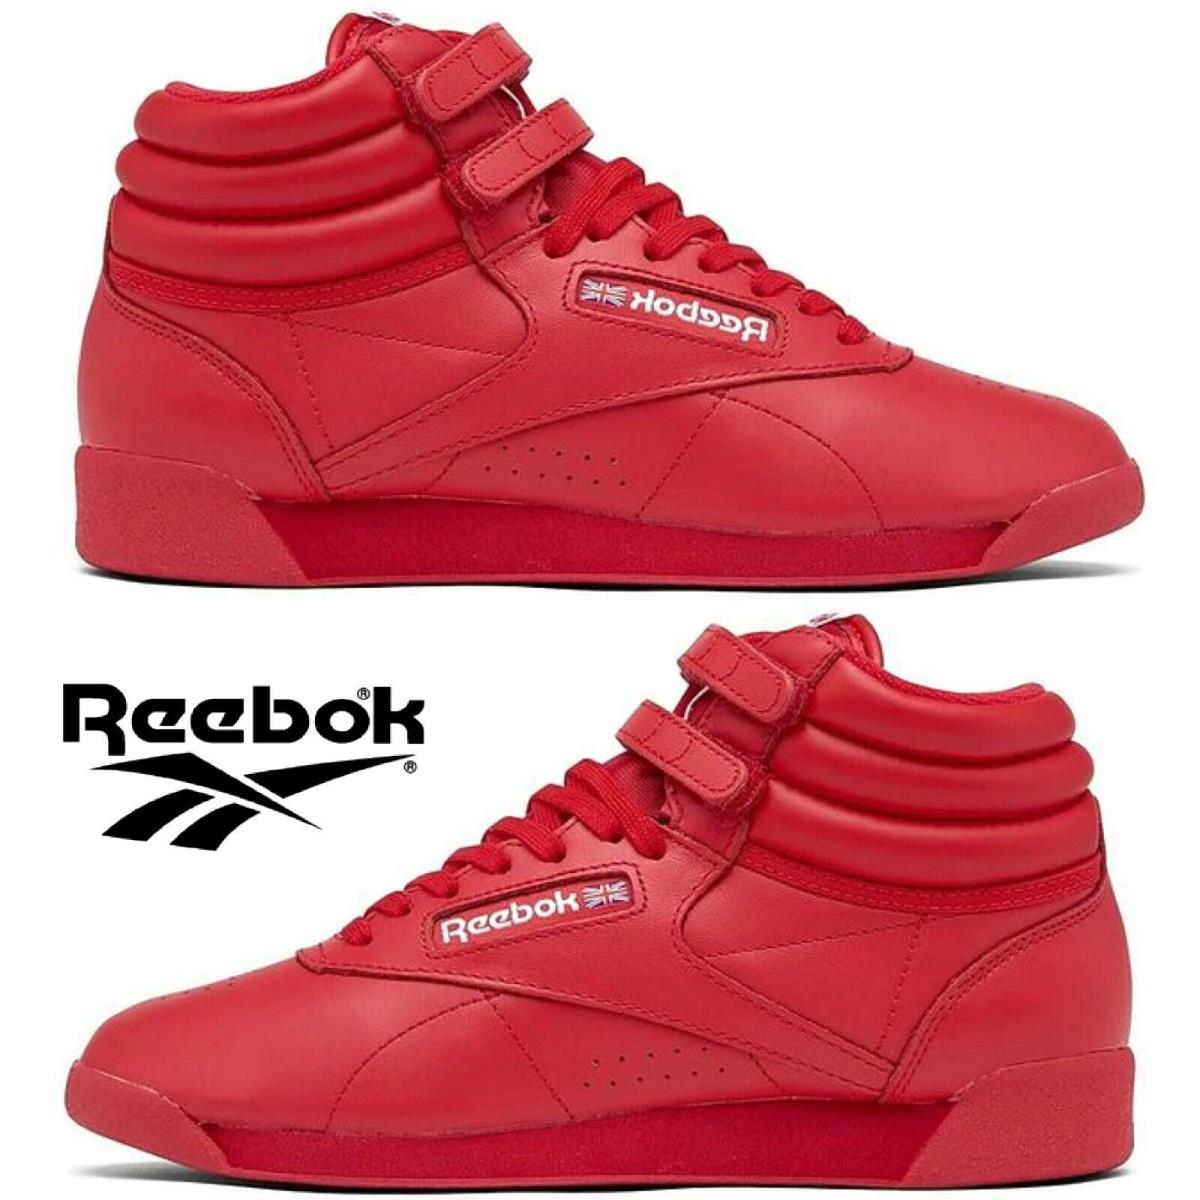 Reebok Freestyle HI Women`s Sneakers Sport Workout Casual Shoes Red